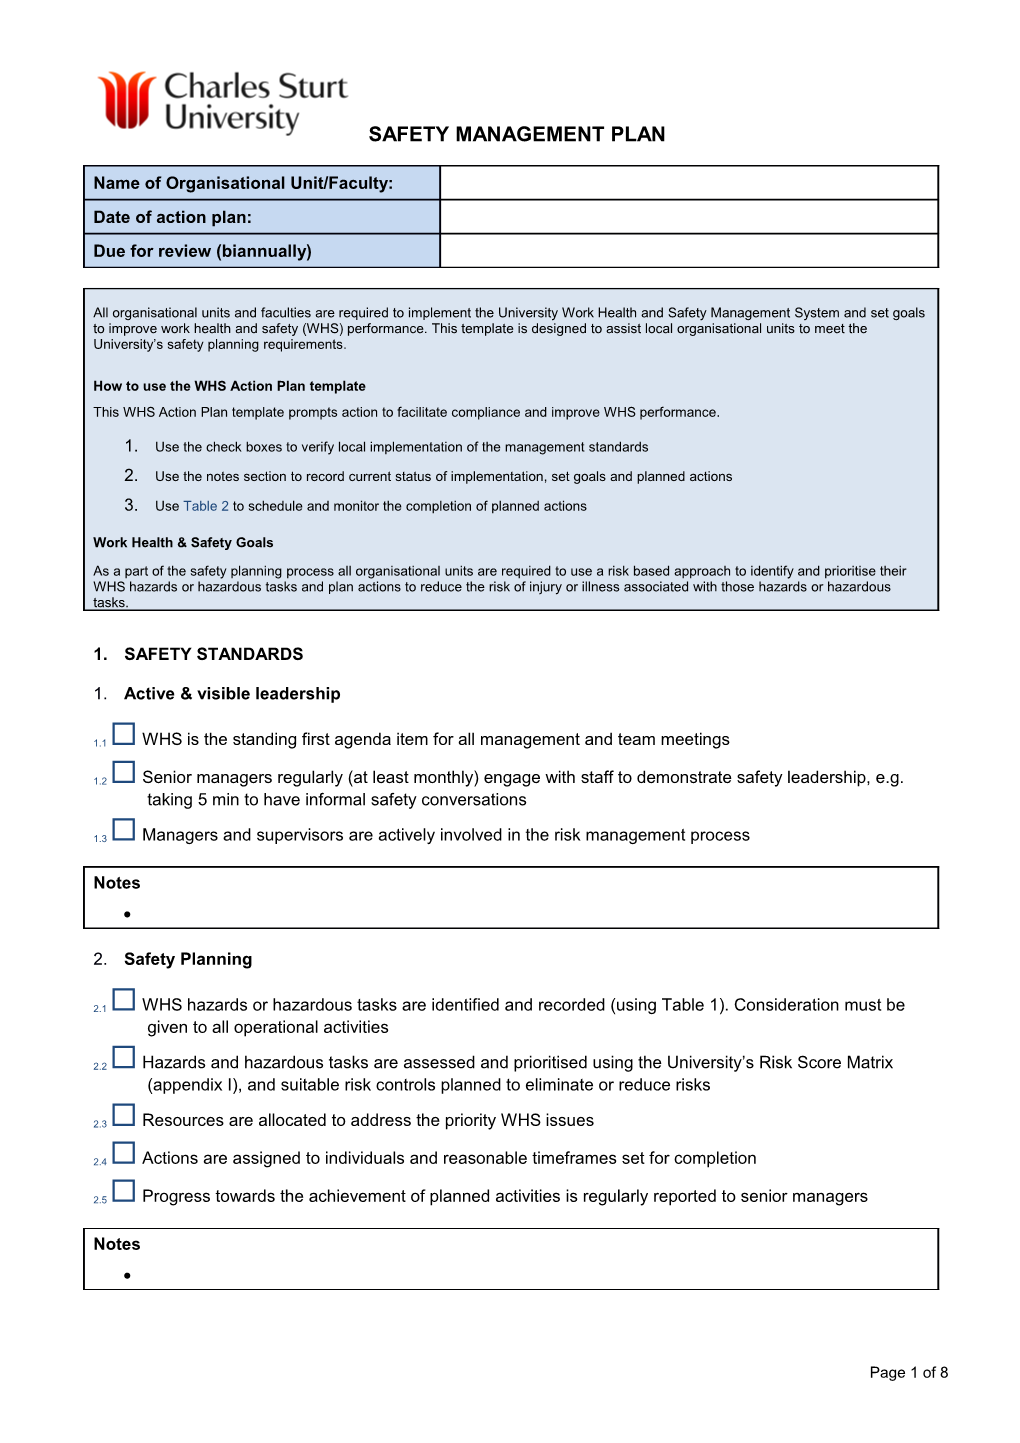 WHS Action Plan Template